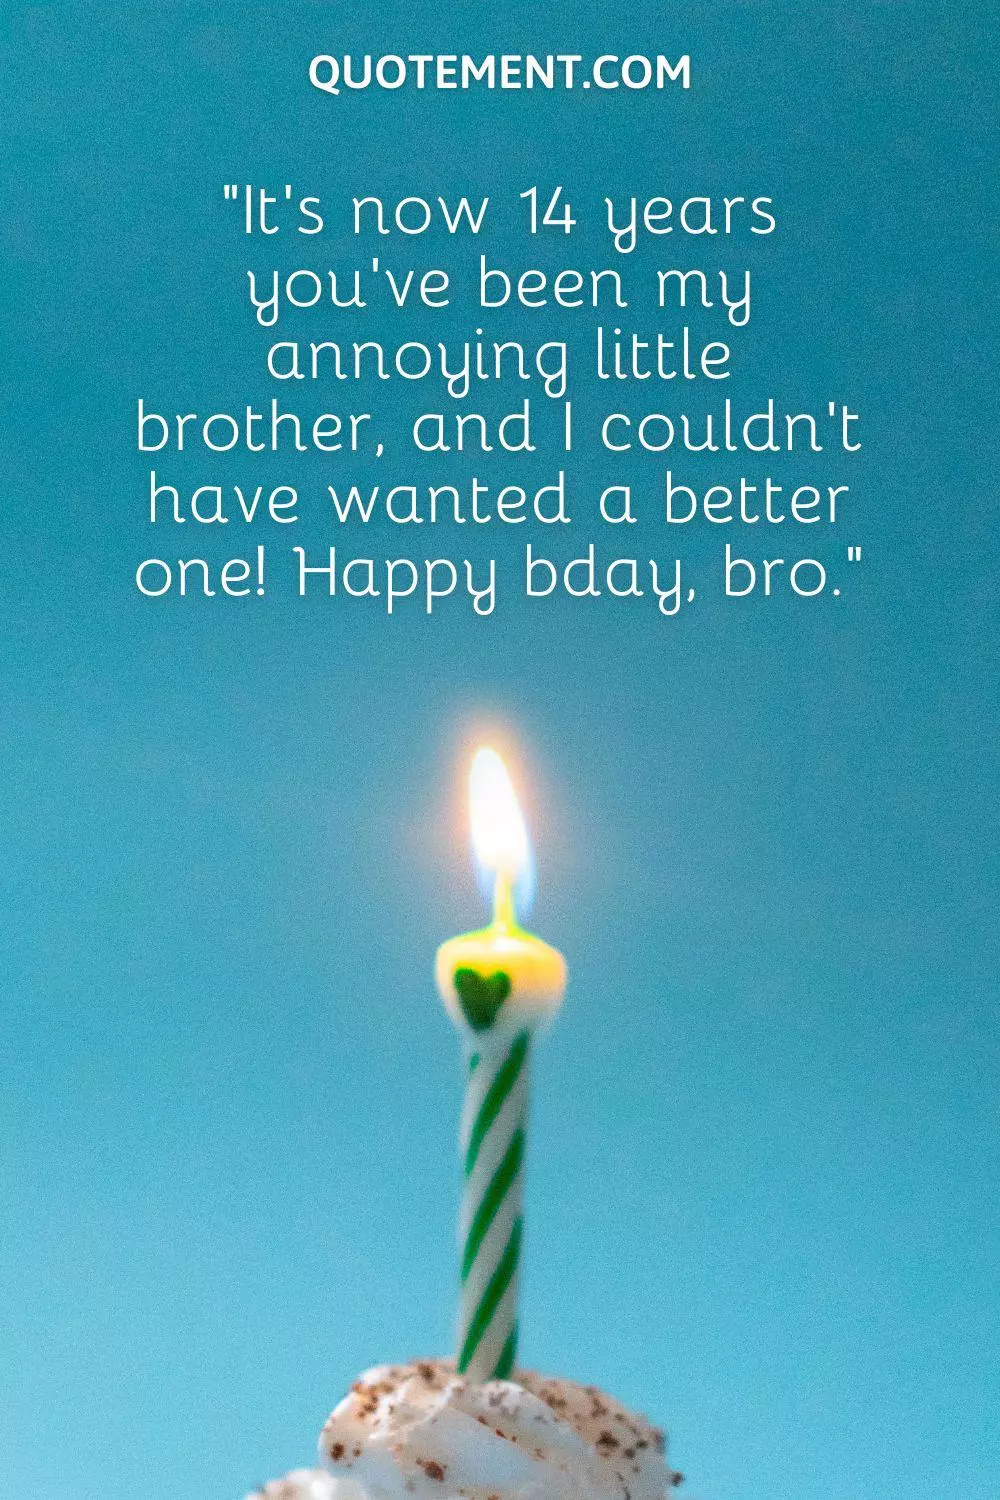 “It’s now 14 years you’ve been my annoying little brother, and I couldn’t have wanted a better one! Happy bday, bro.”